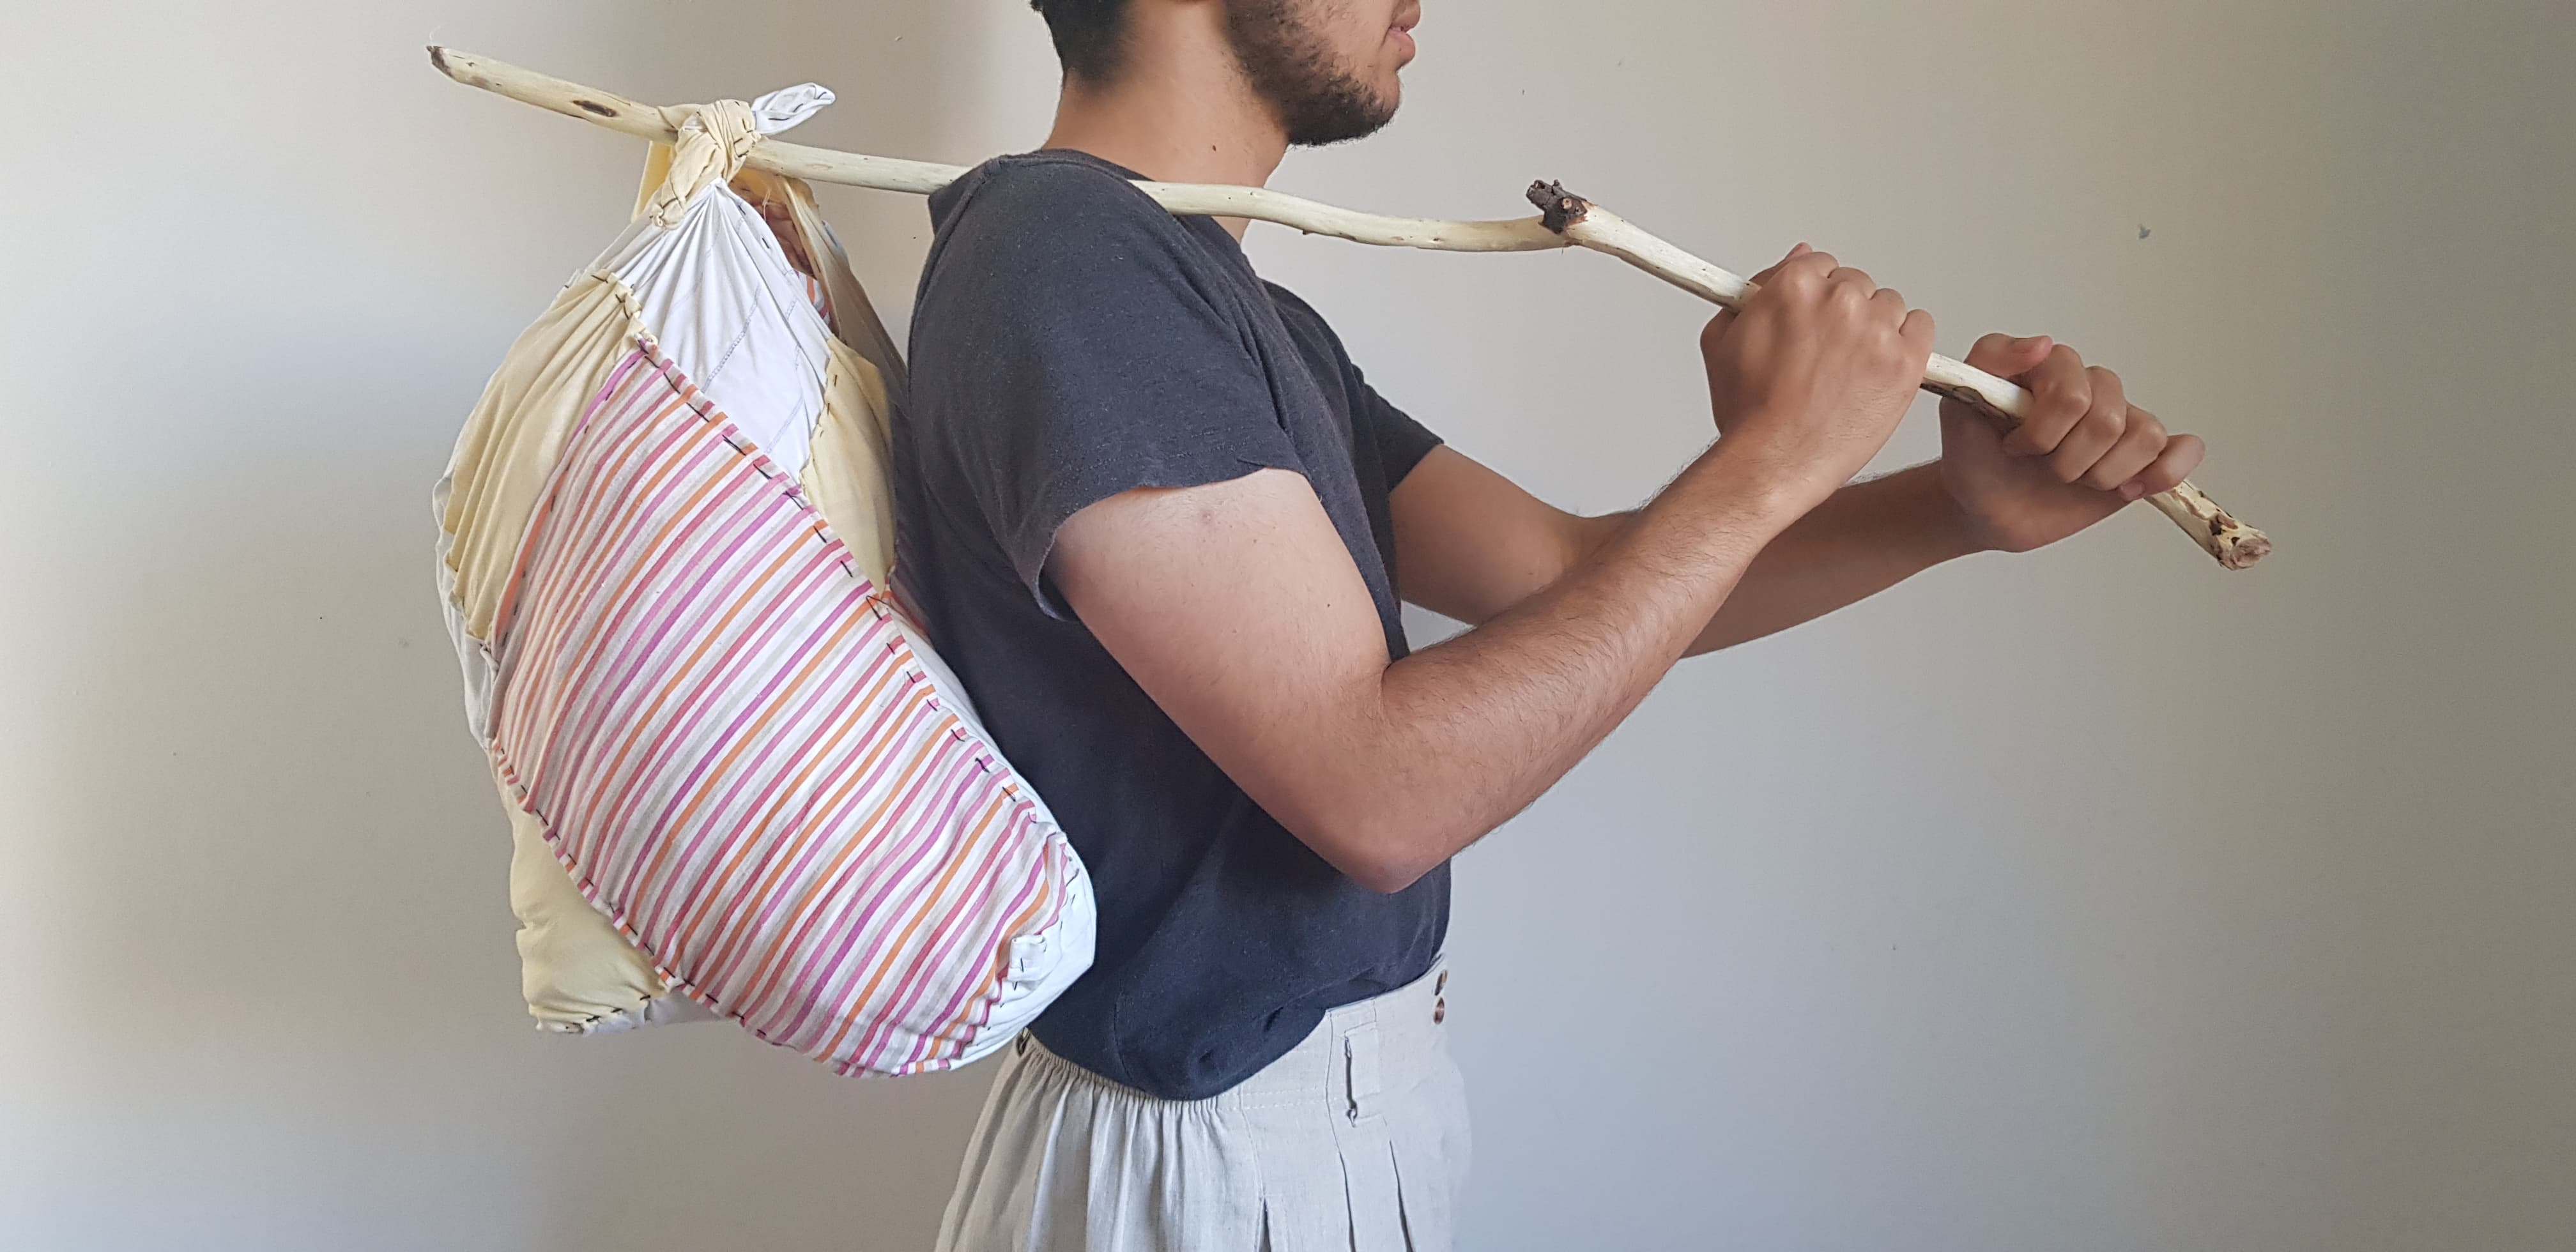  a person with stubb facing towards the right, holding a stick over their shoulder. 
                       Attached to the stick is a bag sewn from scrap fabric